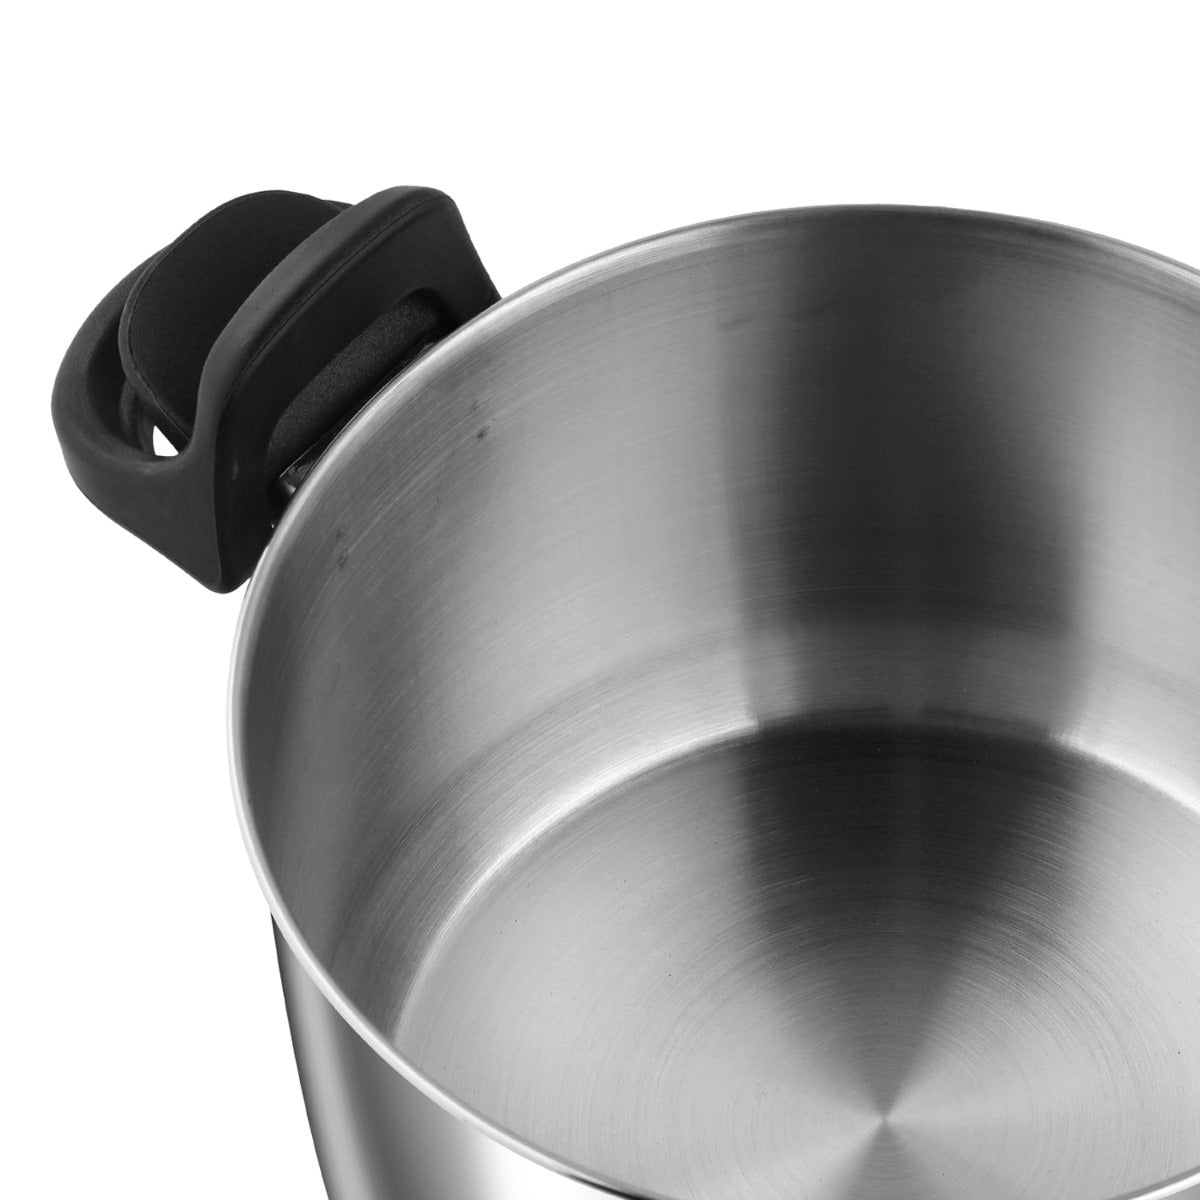 AISI 304 Food Grade Hygienic Stainless Steel Pasta Pot